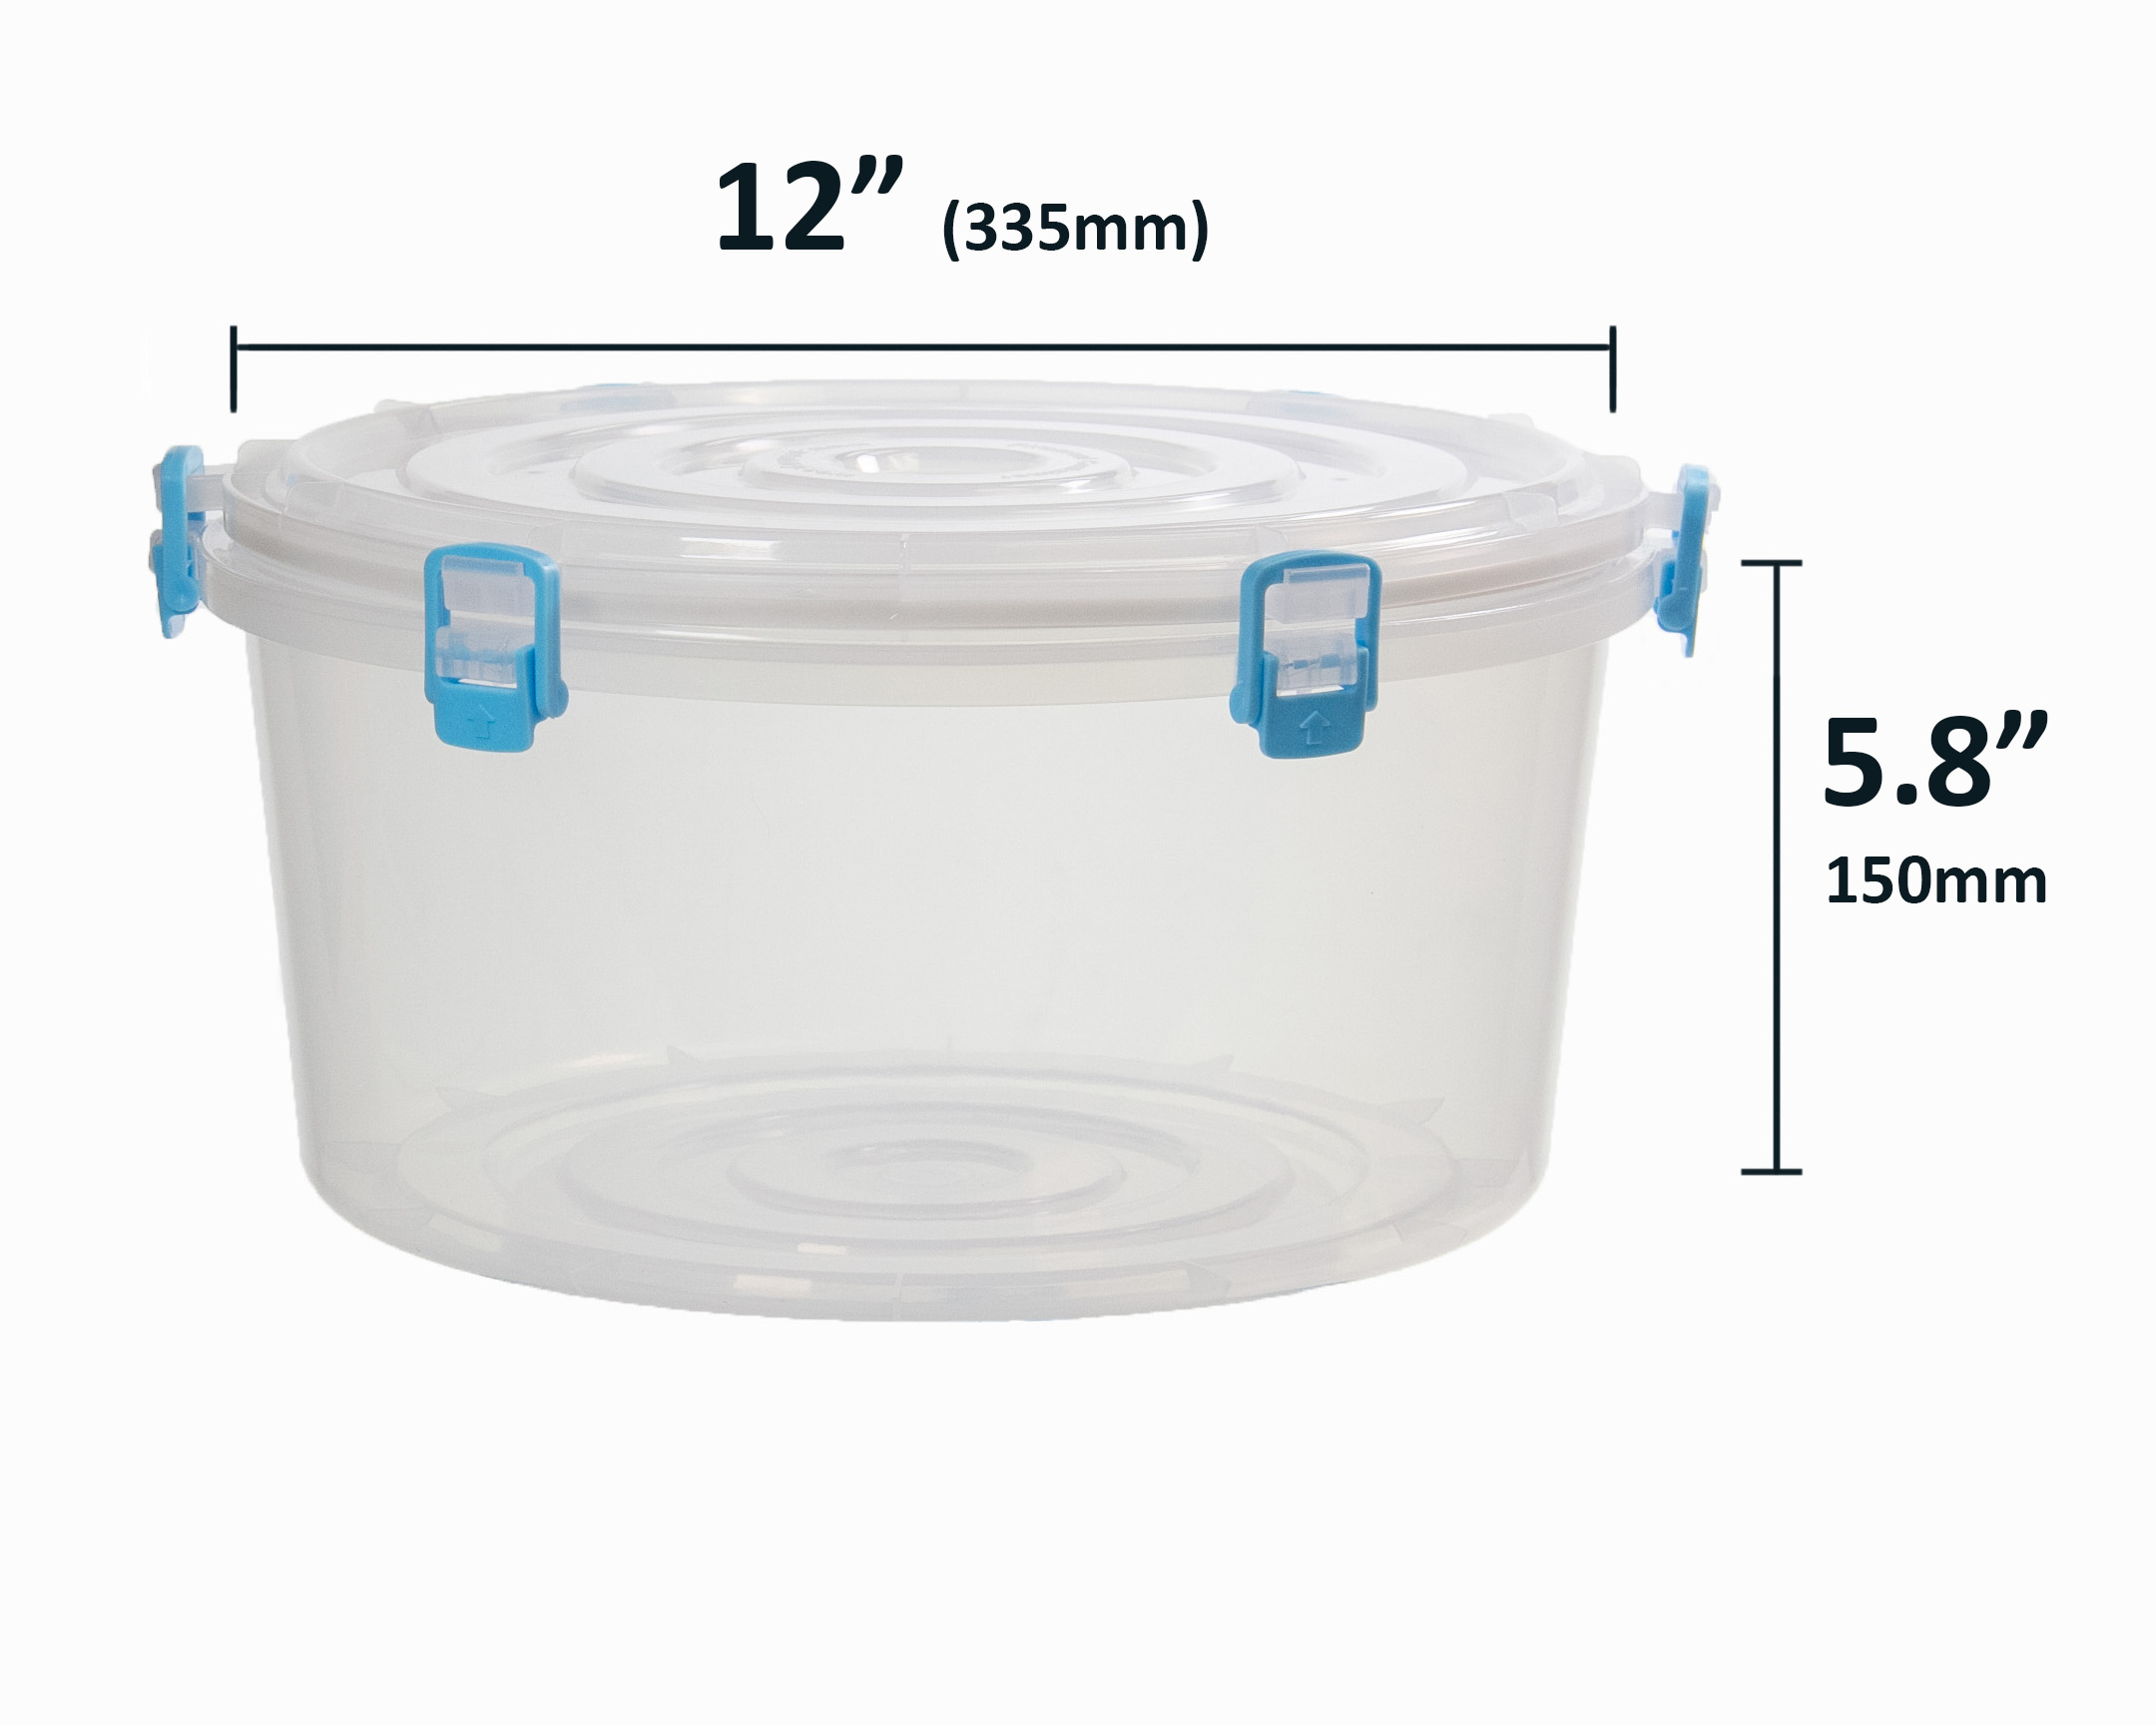 how can I make a container like this airtight for storing filament